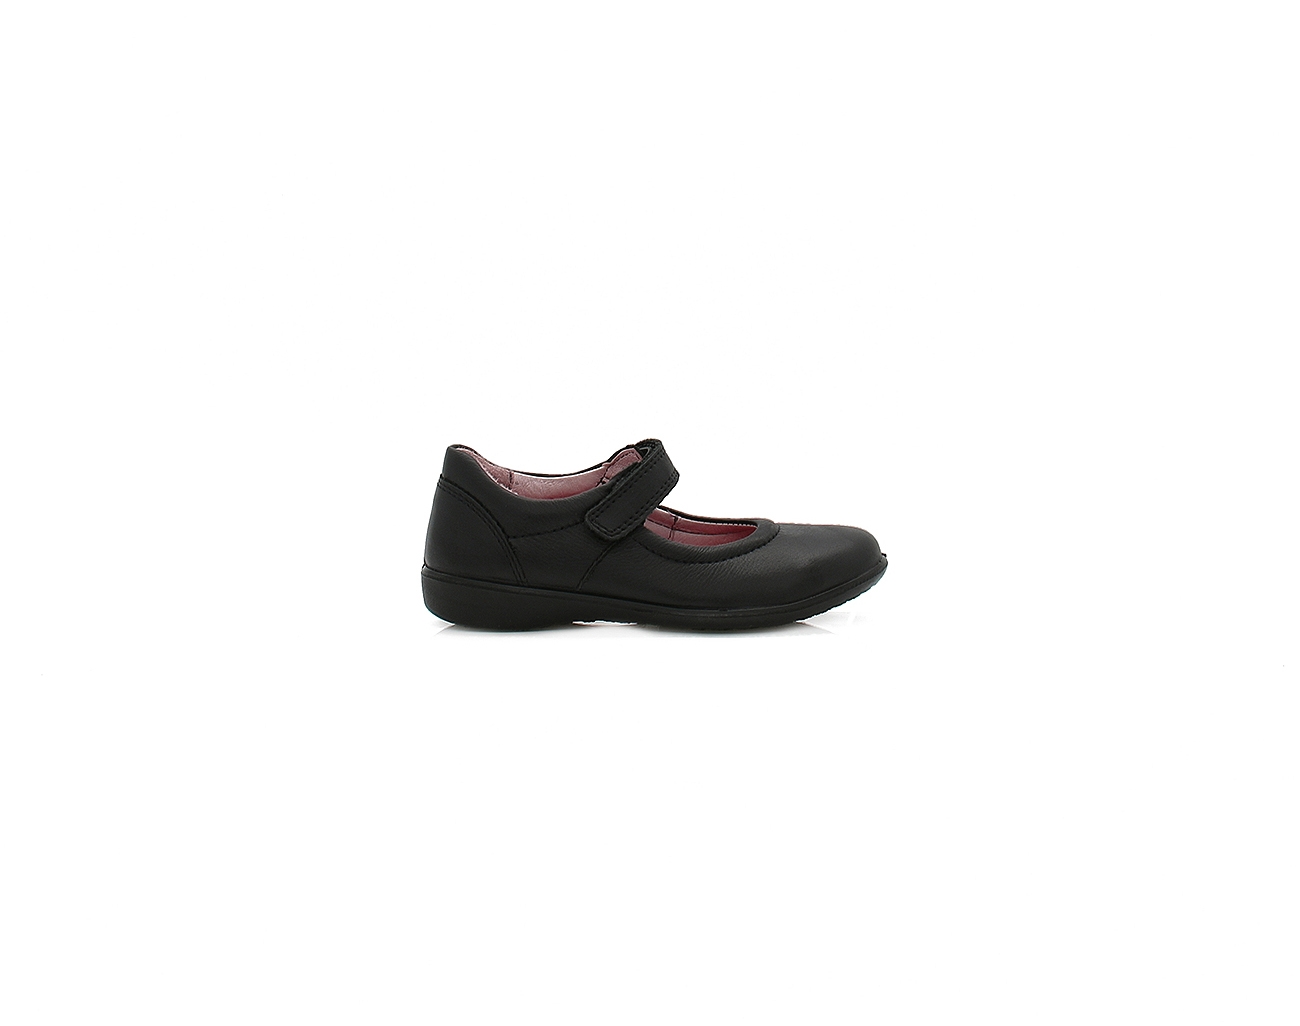 Womens Ricosta Beth – Black School Shoes – Velcro – Suitable For Orthotics – Strong Heel Support – Fits Narrow Foot – Size 33 / Width G – Leather